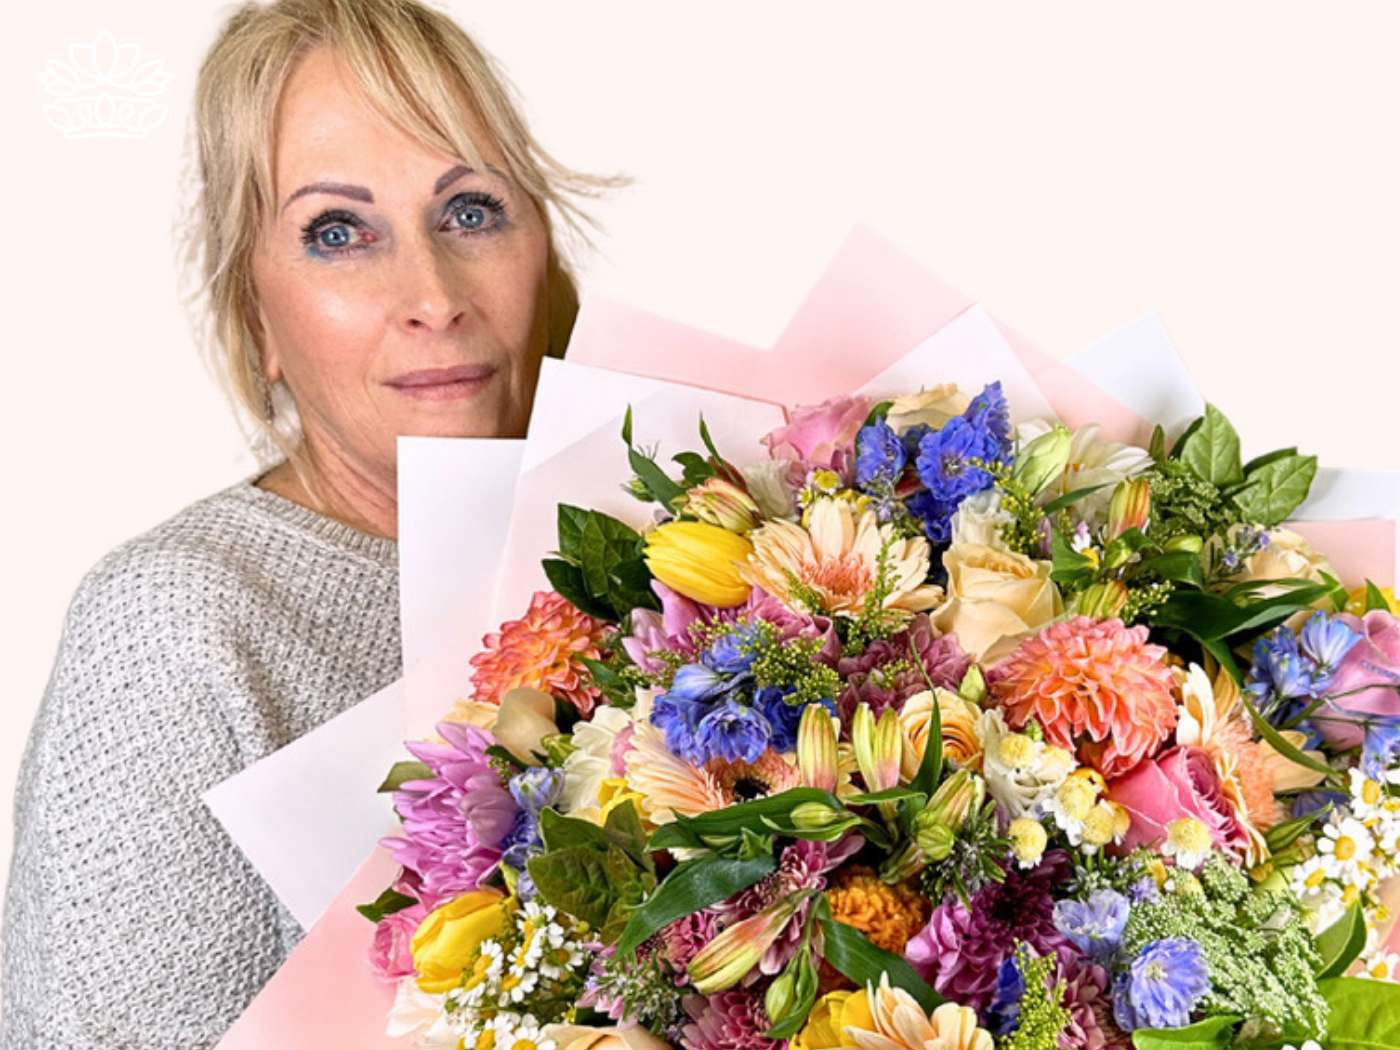 Woman holding a large, colorful bouquet from the Easter Flowers Collection, symbolizing the joy of the Easter celebration and the Christian holiday, presented by Fabulous Flowers and Gifts.